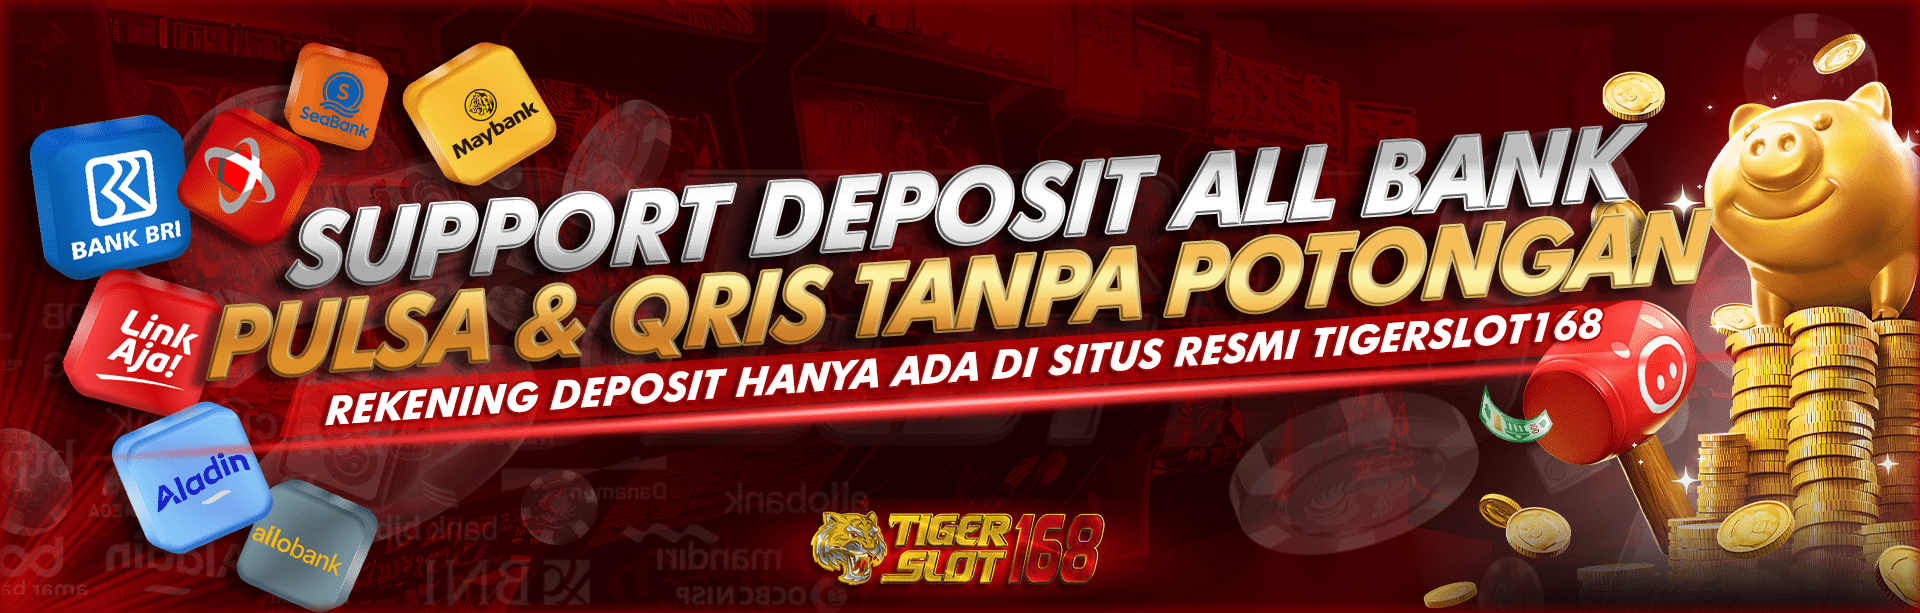 SUPPORT DEPOSIT ALL BANK 